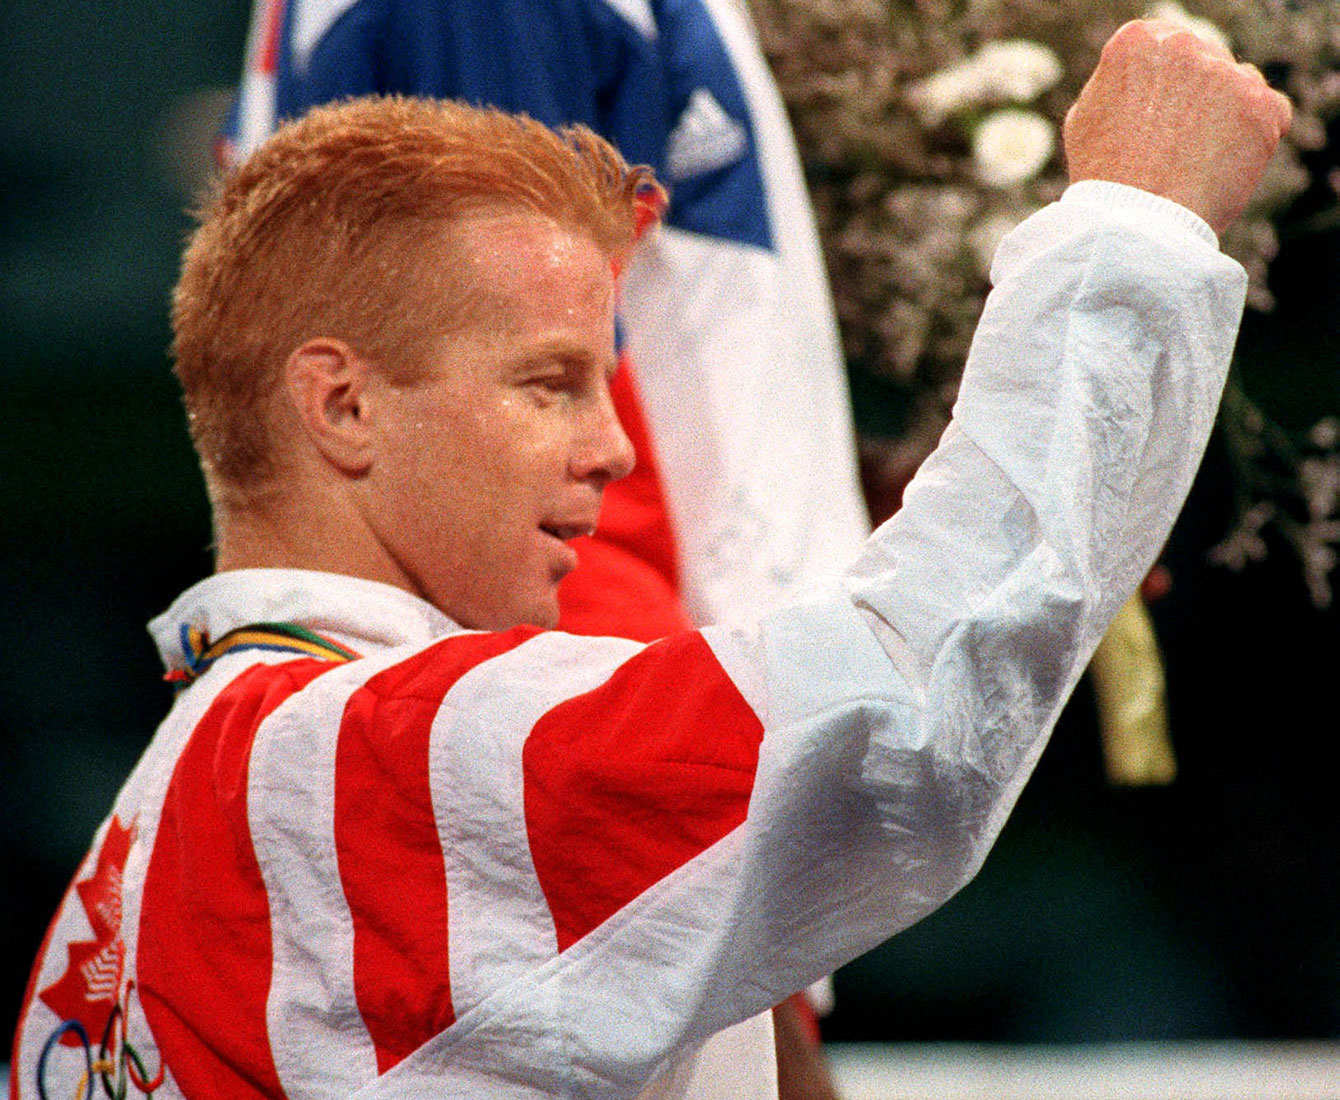 Mark Leduc raises his arm after being awarded his Olympic boxing silver medal. 